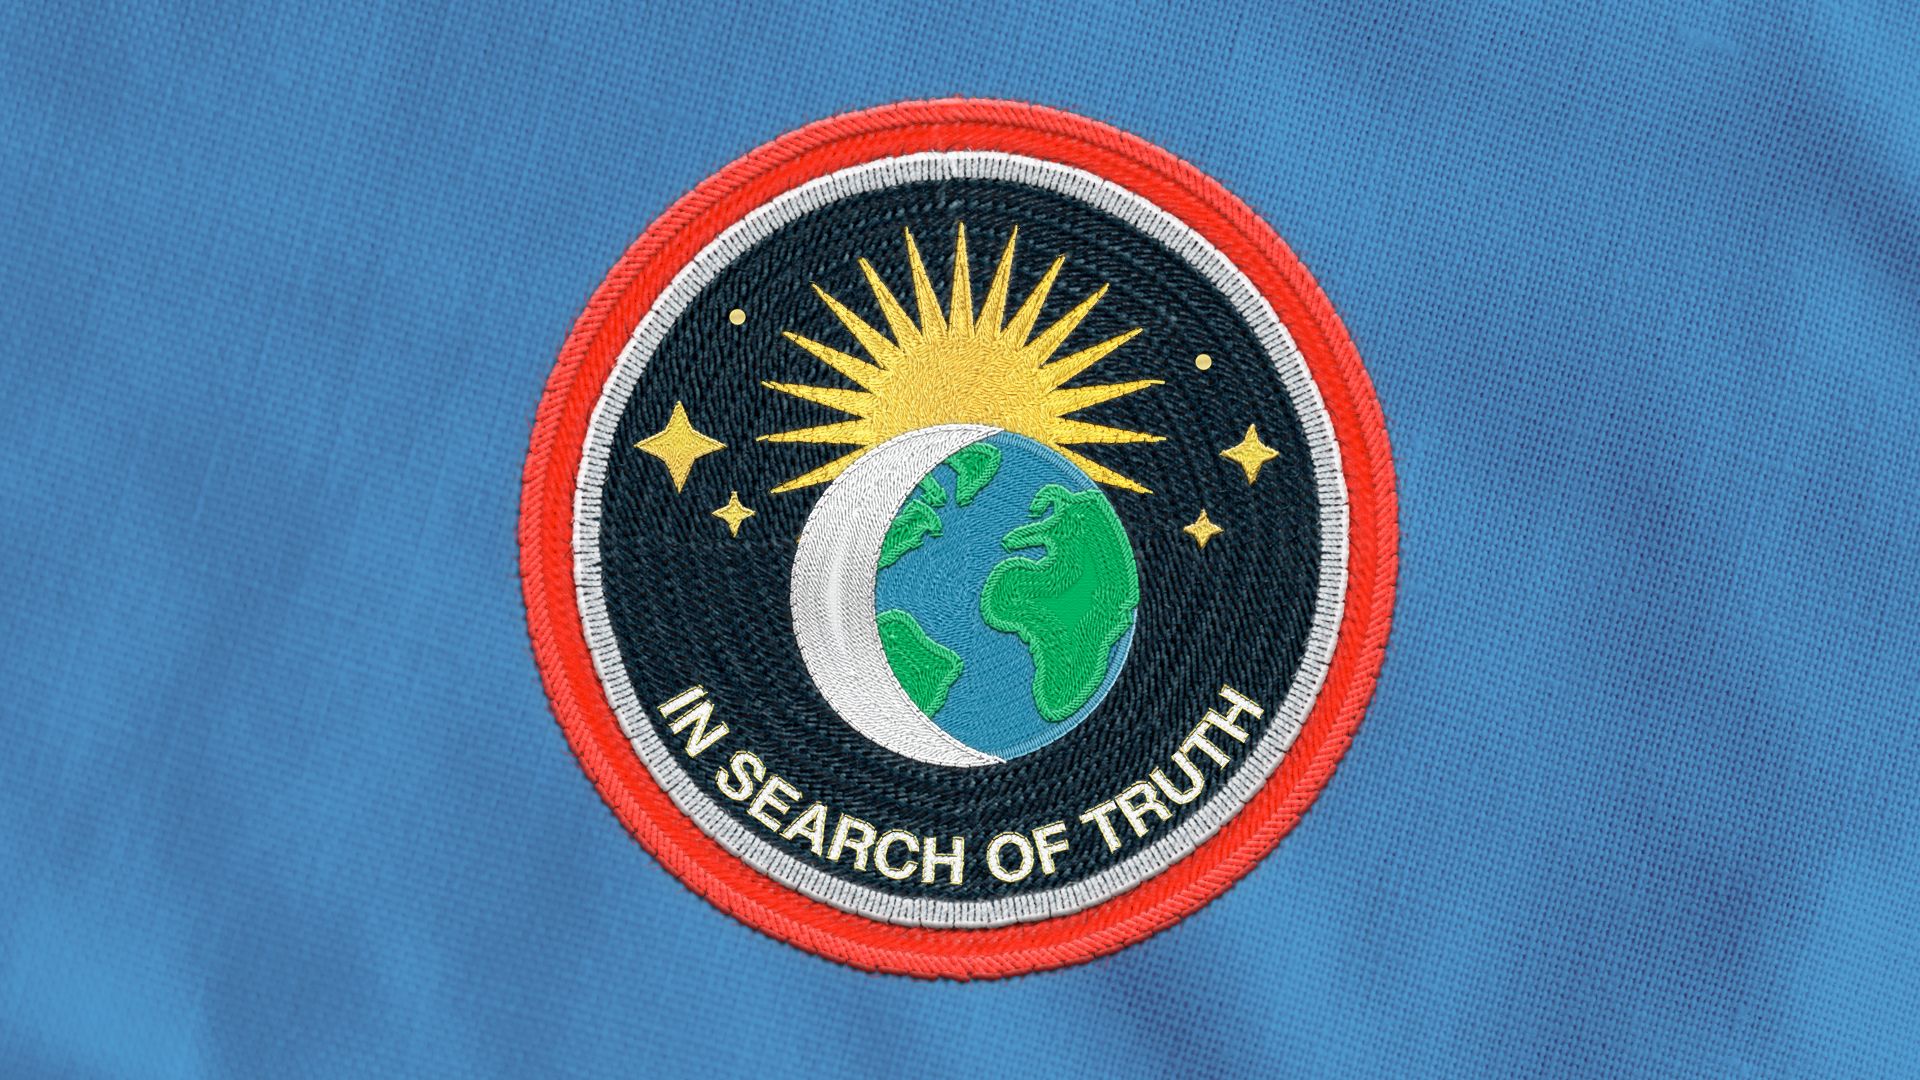 Illustration of an astronaut badge depicting the Sun, Moon and Earth in a semi-eclipse state, the words "IN SEARCH OF TRUTH" are on the badge. 